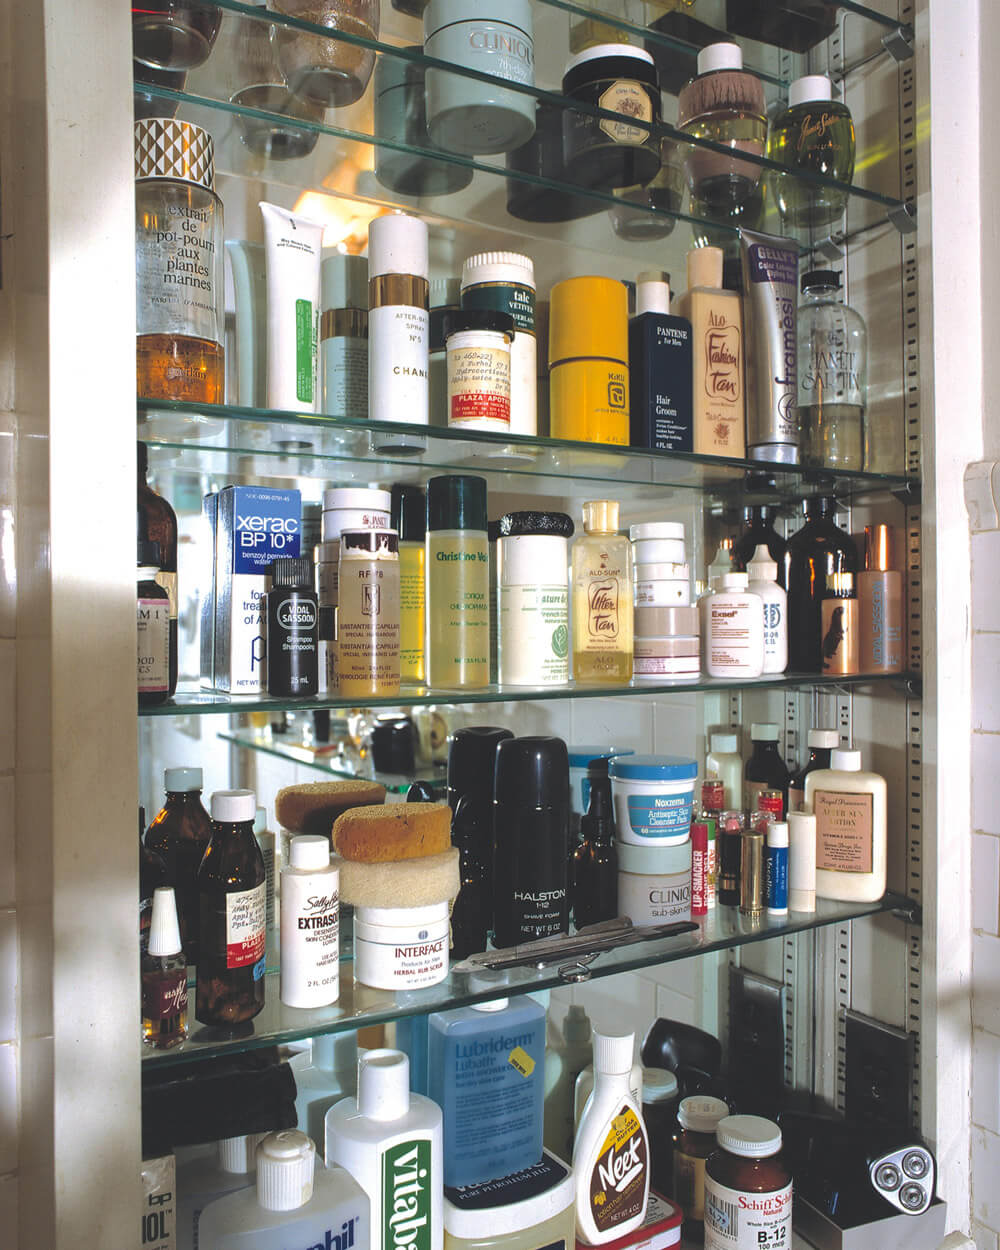 A photograph of Andy Warhol’s medicine cabinet from nineteen eighty seven. David Gamble, who took the photograph shortly after Warhol’s death, imagined it as a portrait of the artist. The prescription drugs in the cabinet seem to have been issued by Doctor Karen Burke, Warhol’s dermatologist, who is often mentioned in his diaries.